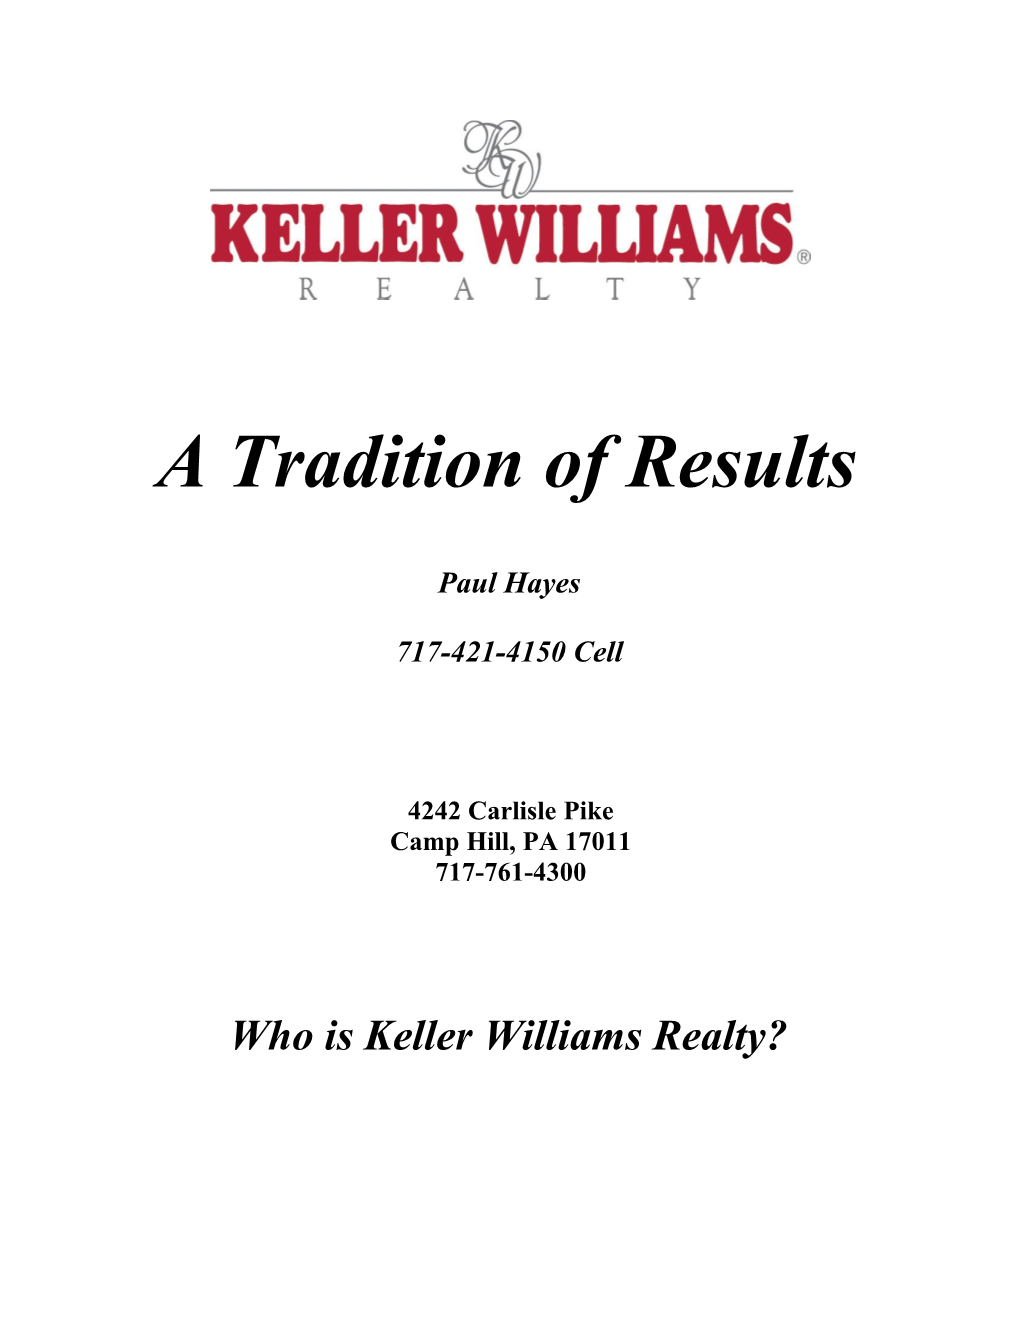 Who Is Keller Williams Realty?